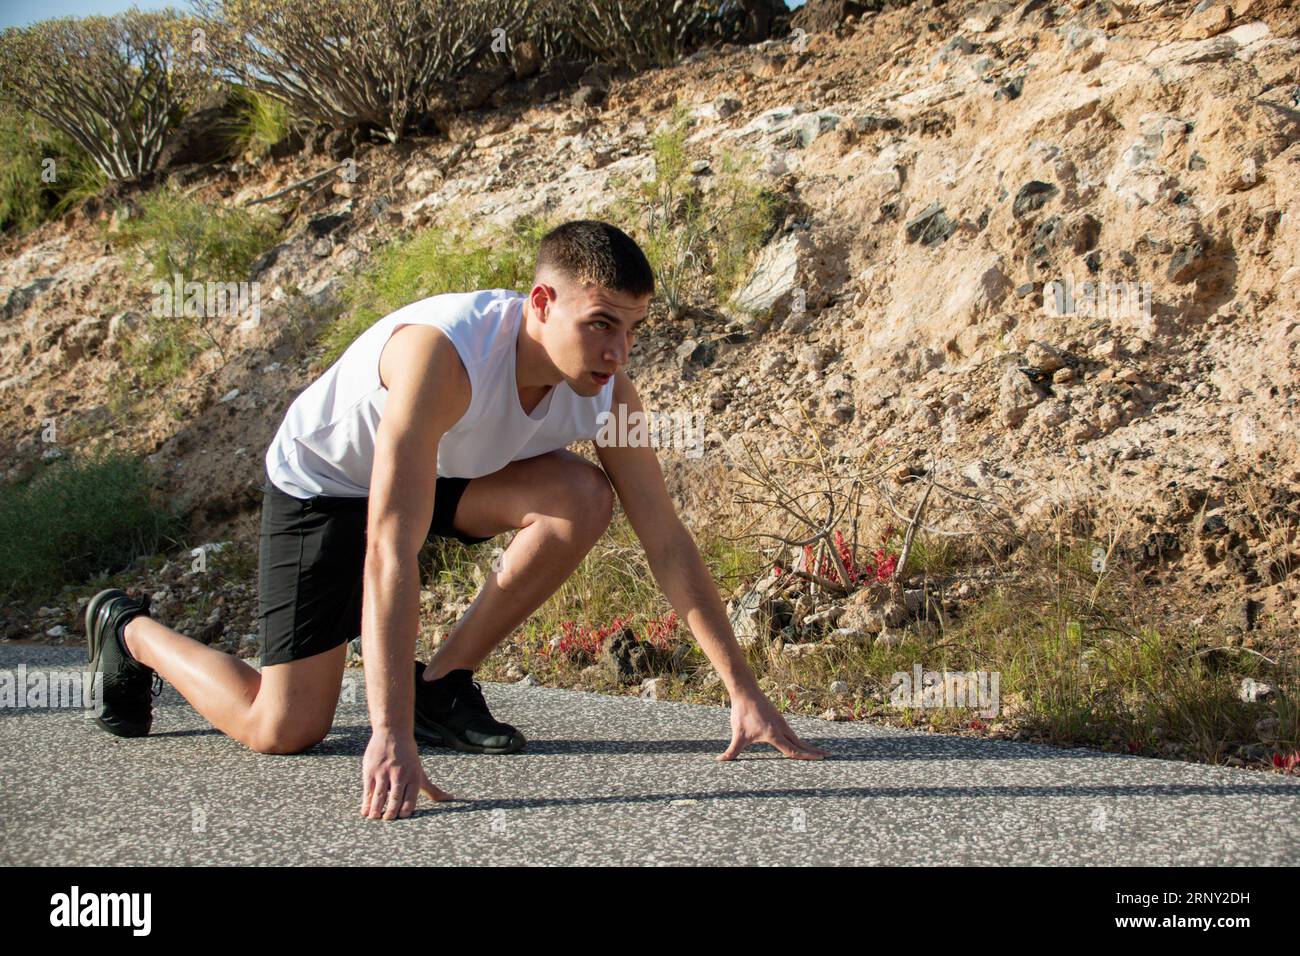 Close-up of a concentrated young Caucasian man simulating the start of an athletics race Stock Photo